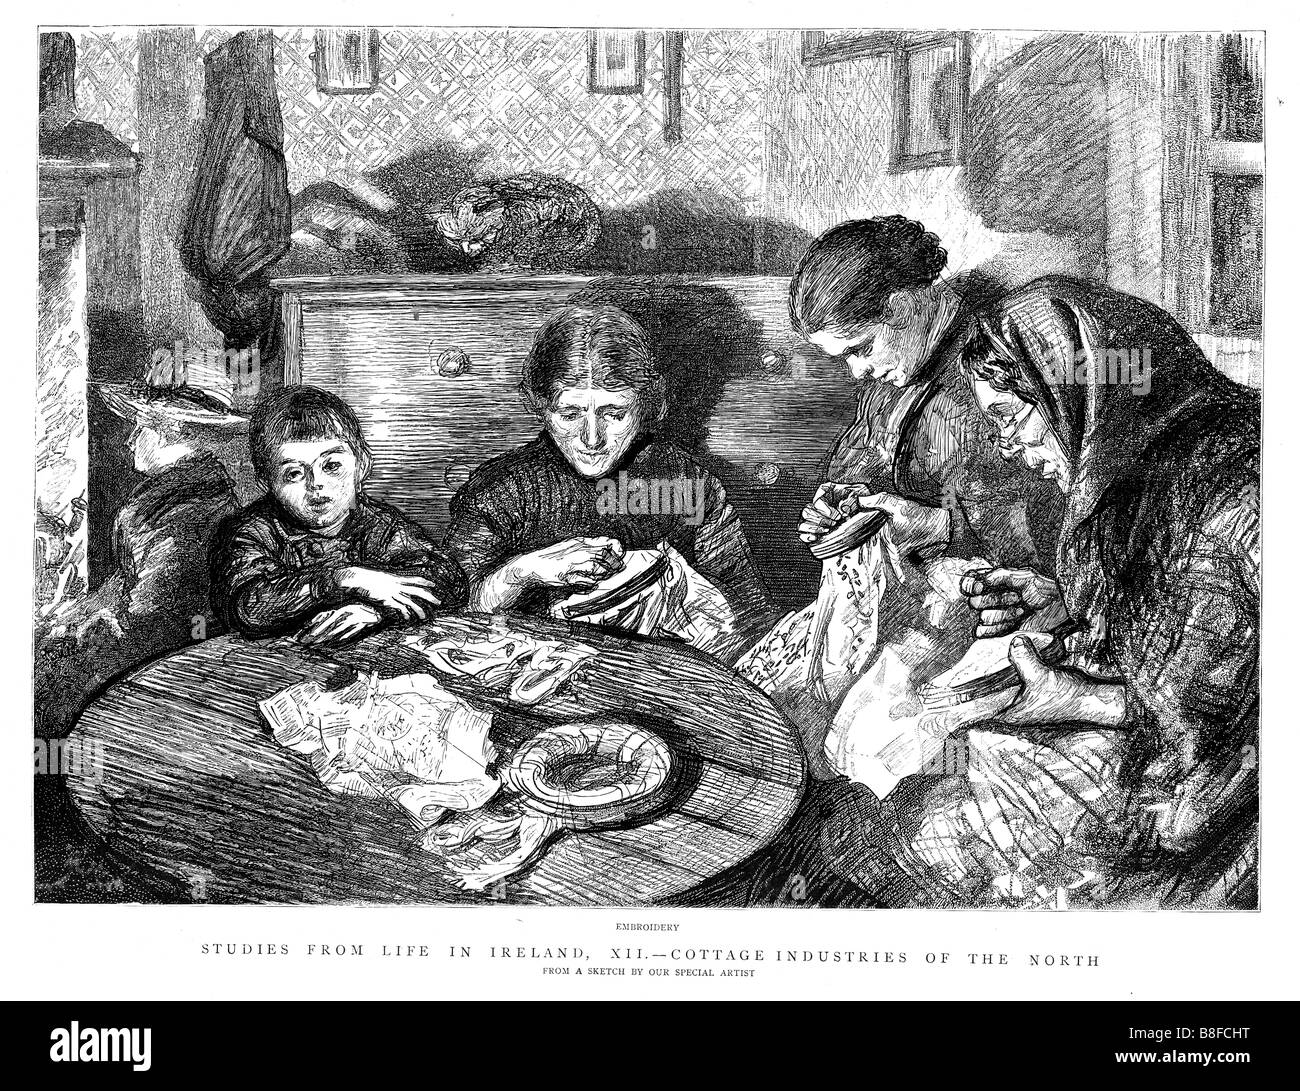 Irish Embroidery 1888 engraving of a cottage industry in the North of Ireland Stock Photo